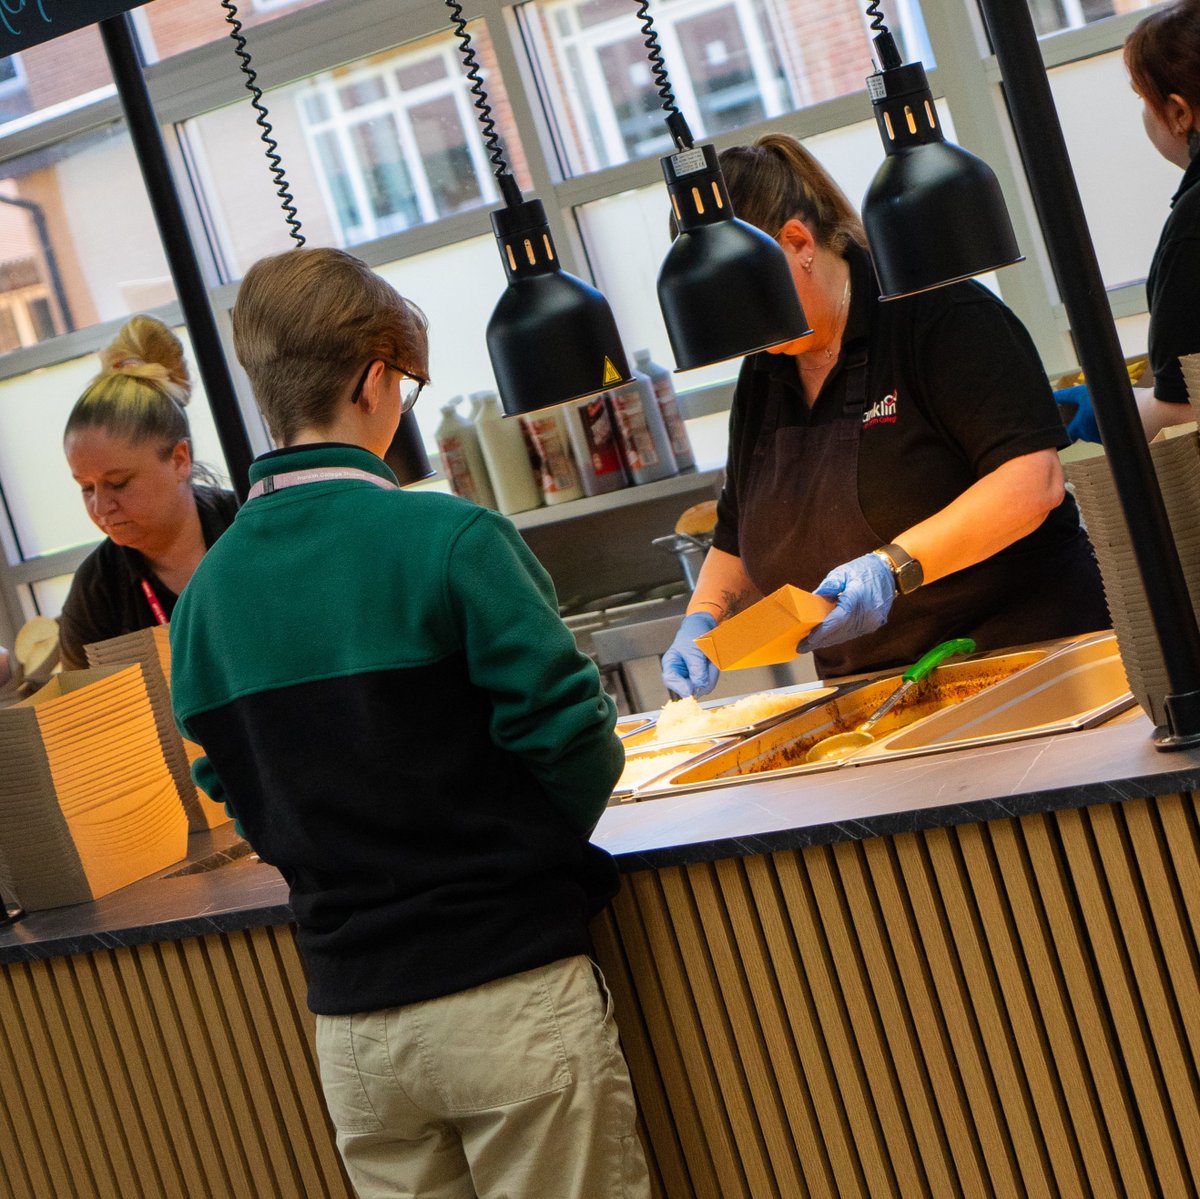 Craving a delicious meal while catching up with friends or your studies? 🍽️ Look no further than The Buzz! Offering everything from handmade pizza, burgers, pasta and more! #SeeYourFuture